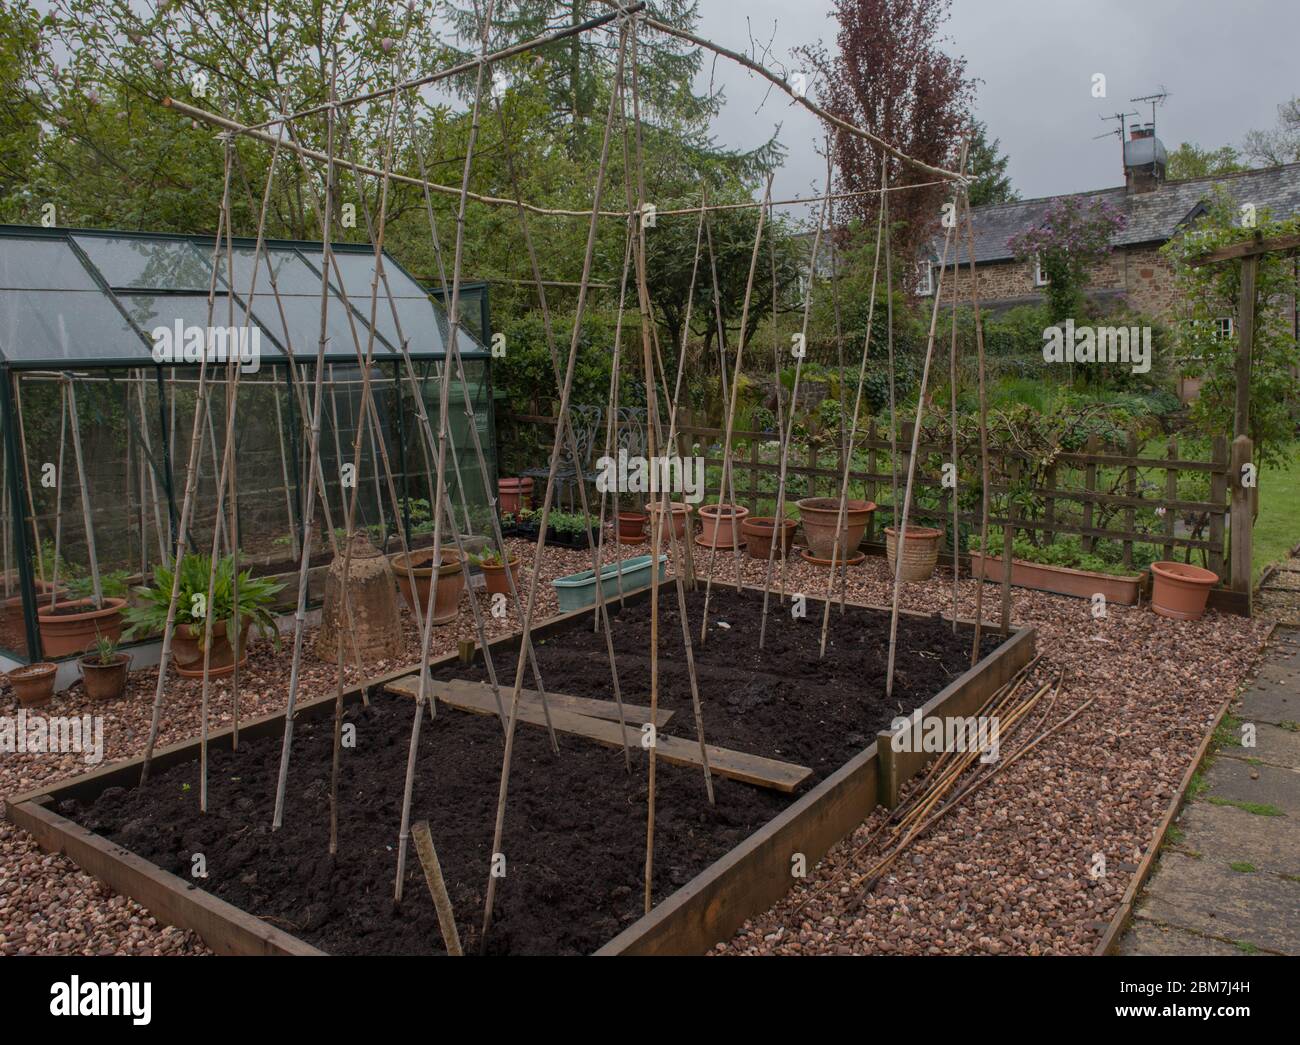 Home Made Bamboo Cane Wigwam for Growing Climbing Vegetables and Plants in a Raised Bed on an Allotment in a Vegetable Garden in Rural Devon, England, Stock Photo